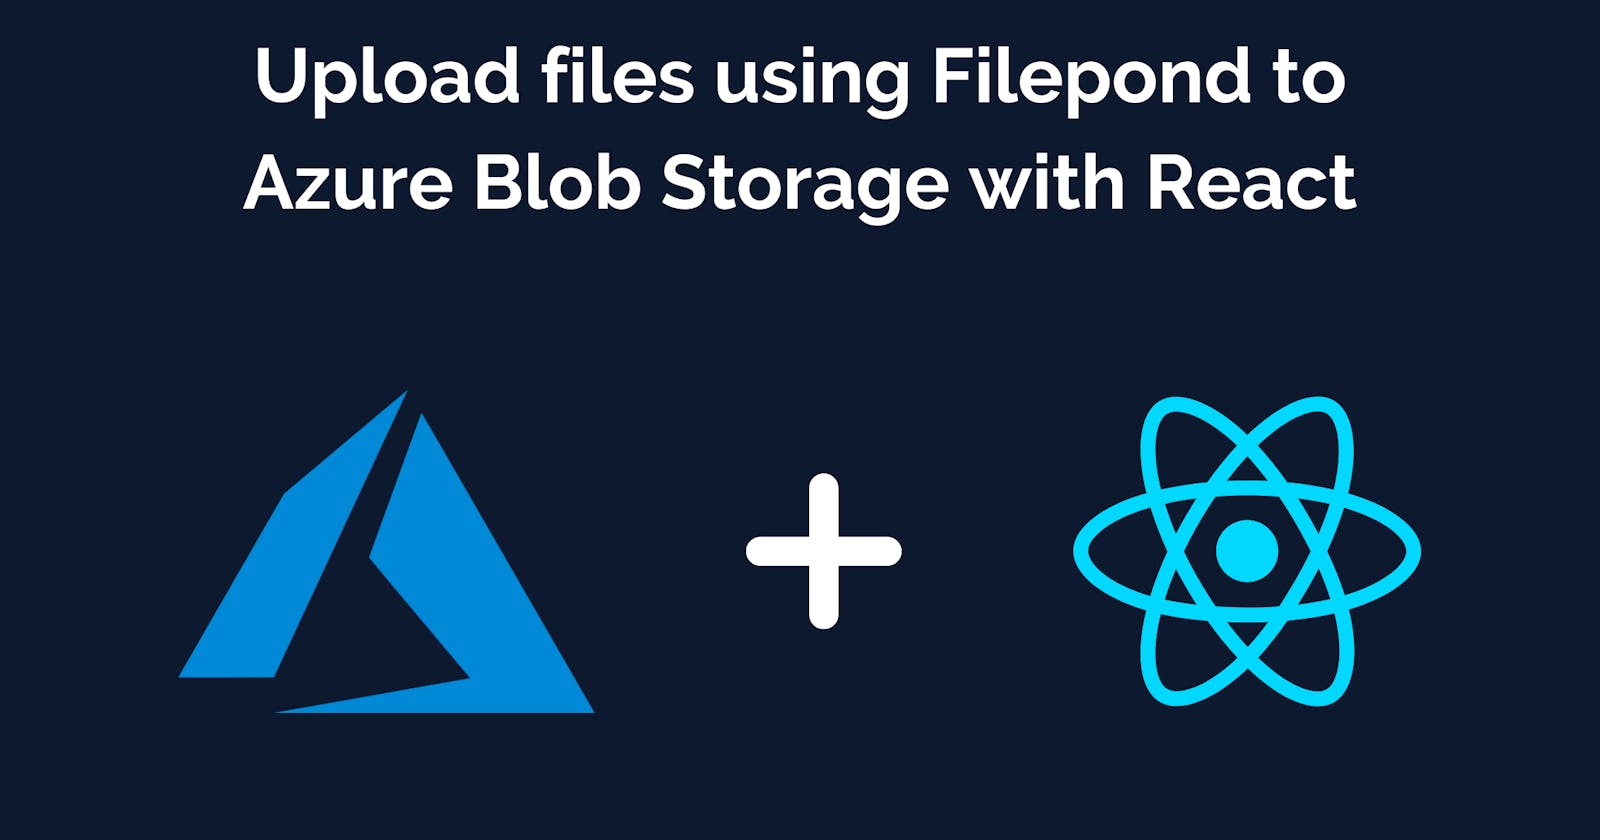 Upload files using Filepond to Azure Blob Storage with React